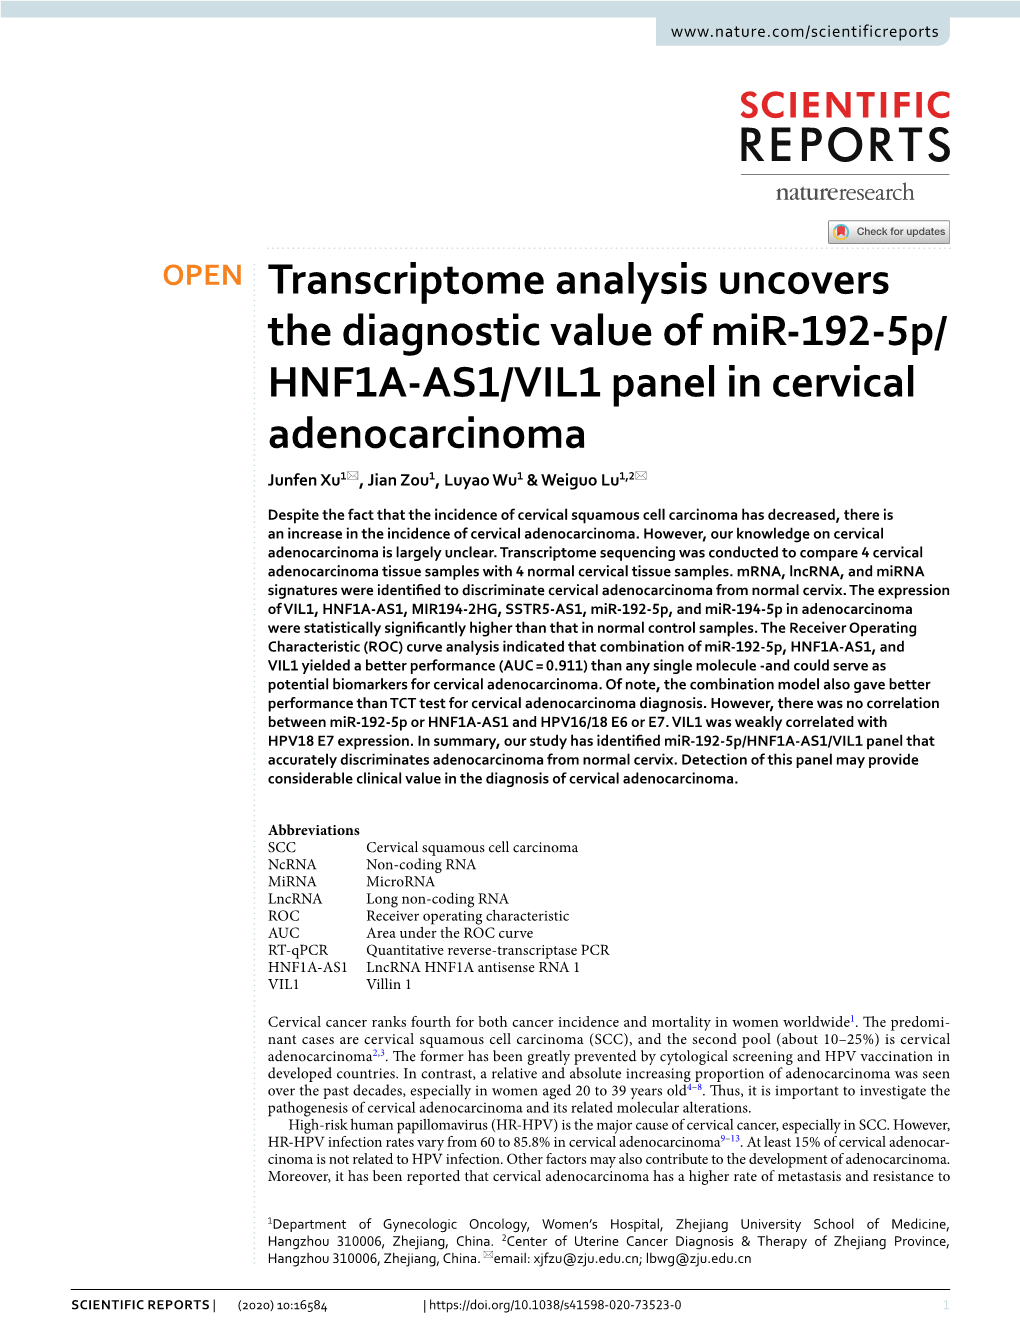 Transcriptome Analysis Uncovers the Diagnostic Value of Mir-192-5P/HNF1A-AS1/VIL1 Panel in Cervical Adenocarcinoma